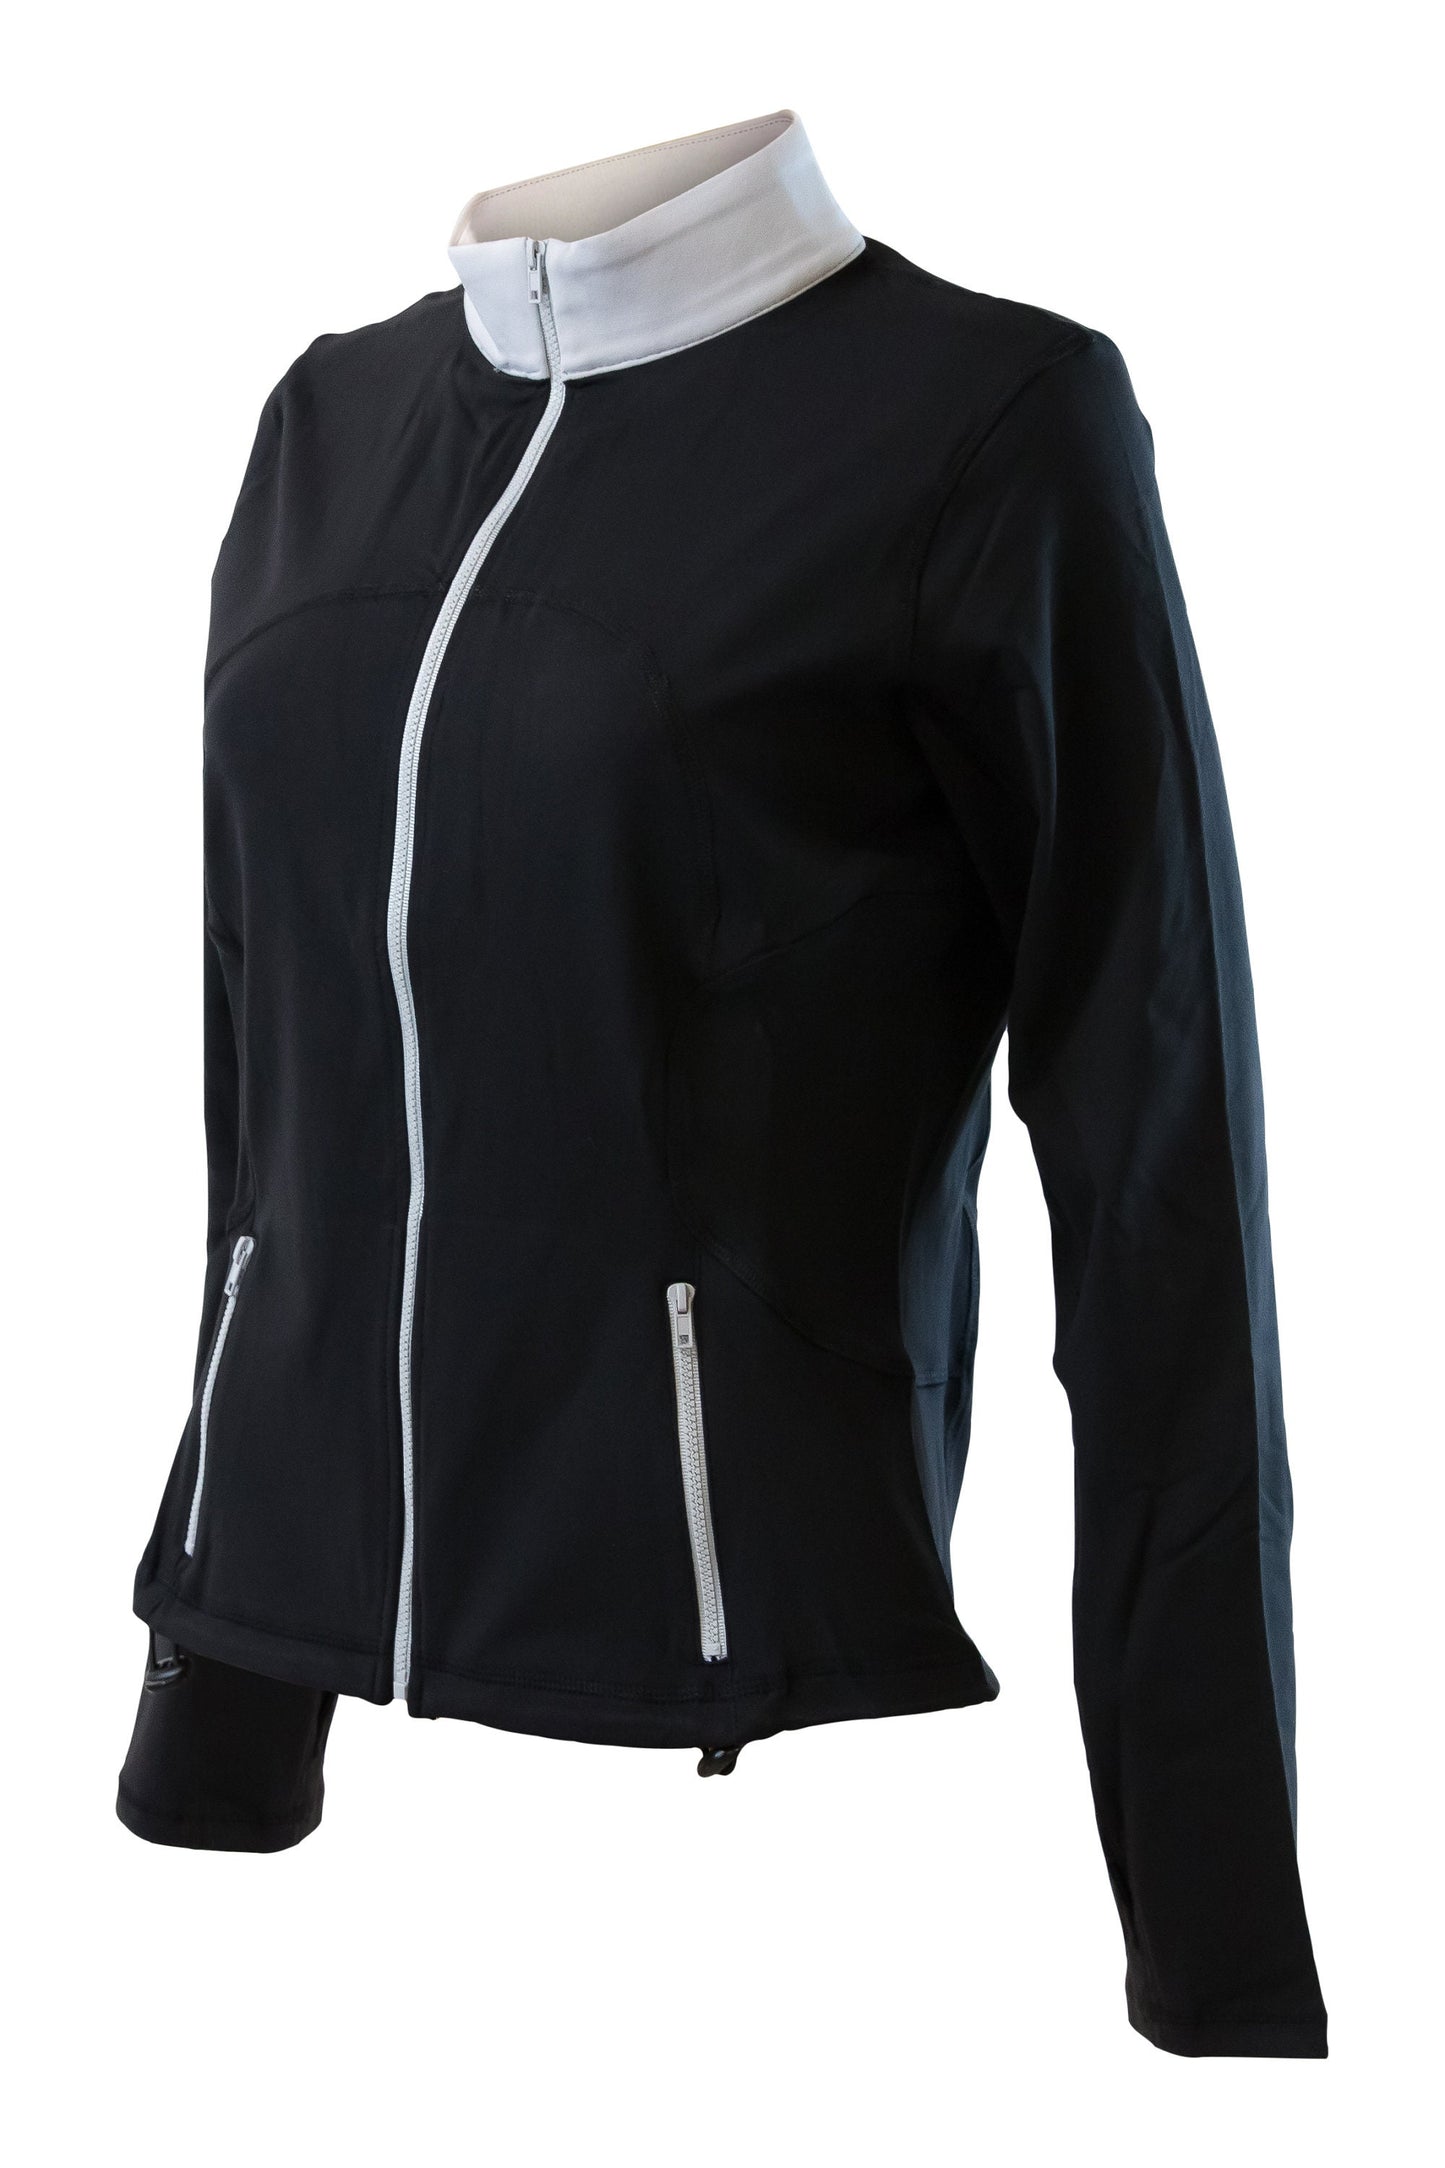 Black and Silver Women's Yoga Track Jacket